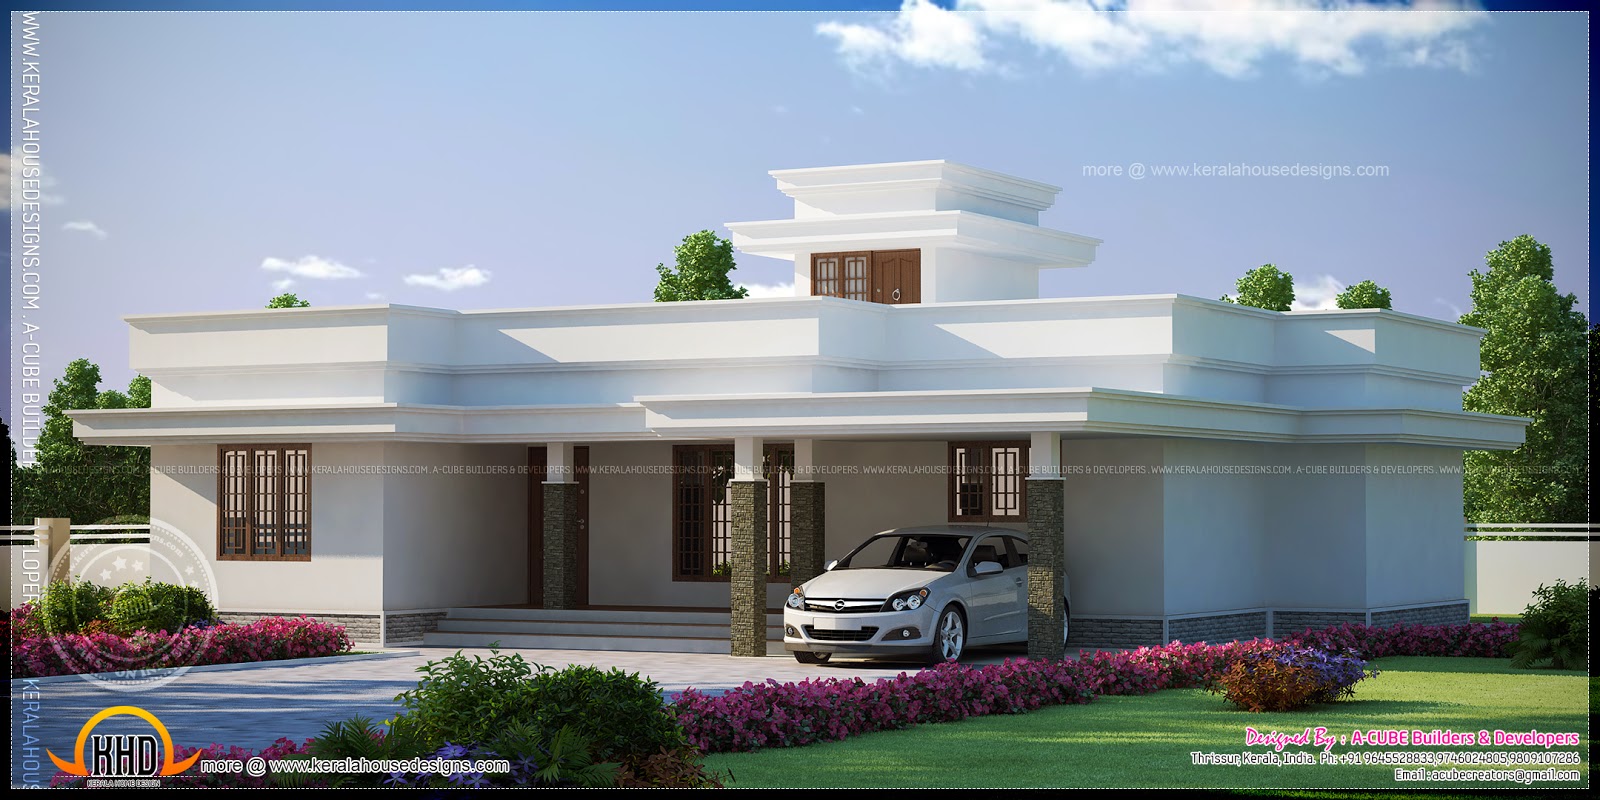  Contemporary  flat  roof  single storied house  model Home  